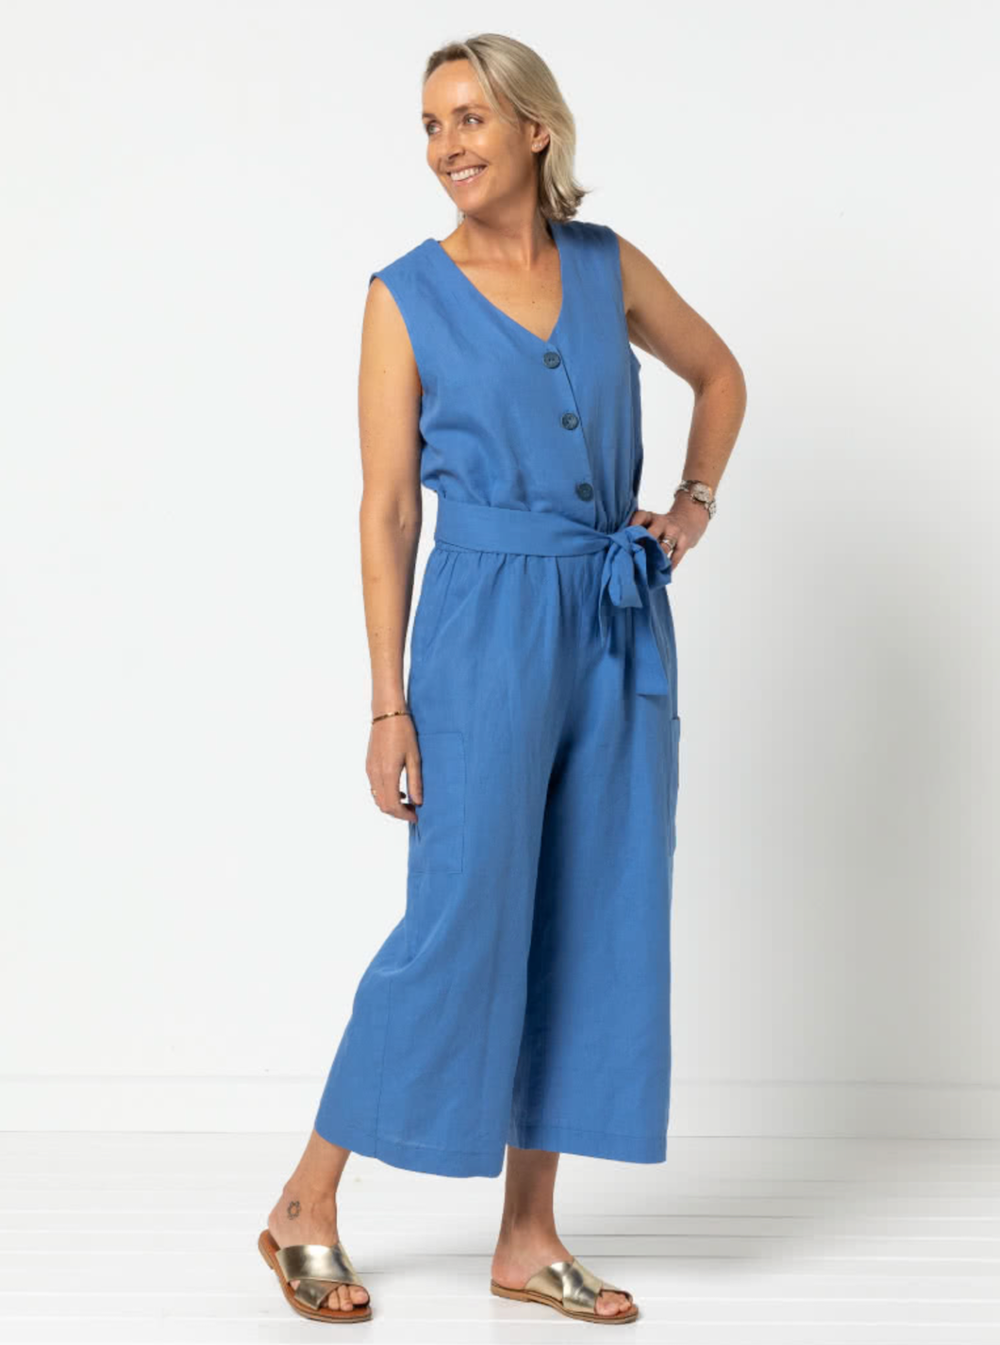 Woman wearing the Birdie Jumpsuit sewing pattern from Style Arc on The Fold Line. A jumpsuit pattern made in crepe, washed linen, or light ponte knit fabric, featuring a sleeveless bodice with buttons, armhole darts, v-neck, elastic waist, wide 7/8 length